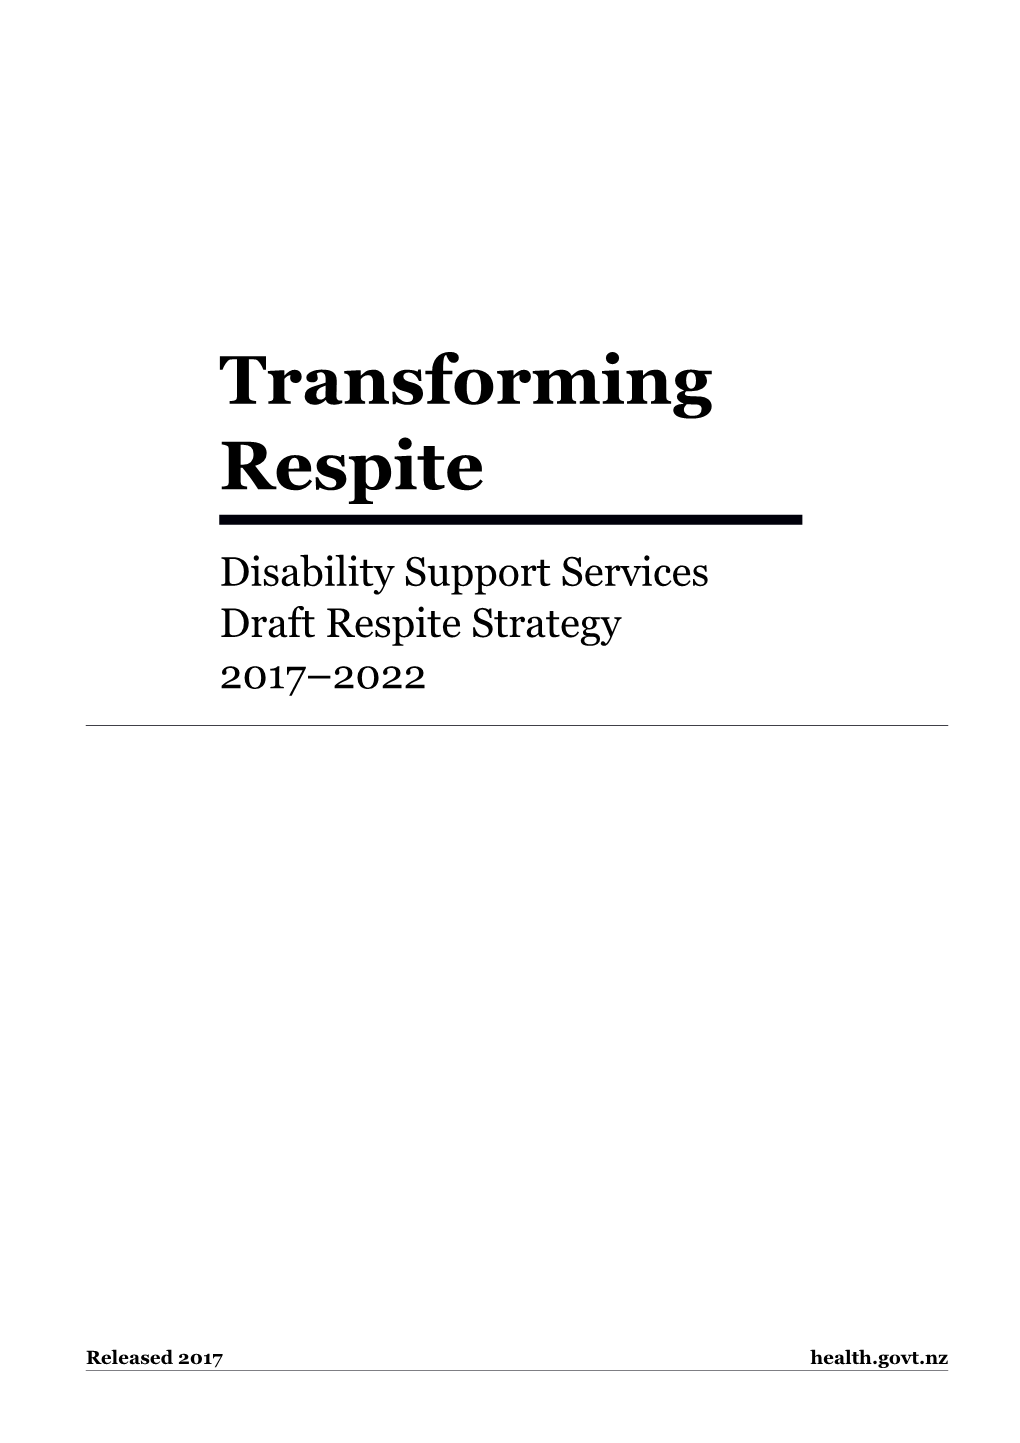 Transforming Respite Disability Support Services Draft Respite Strategy